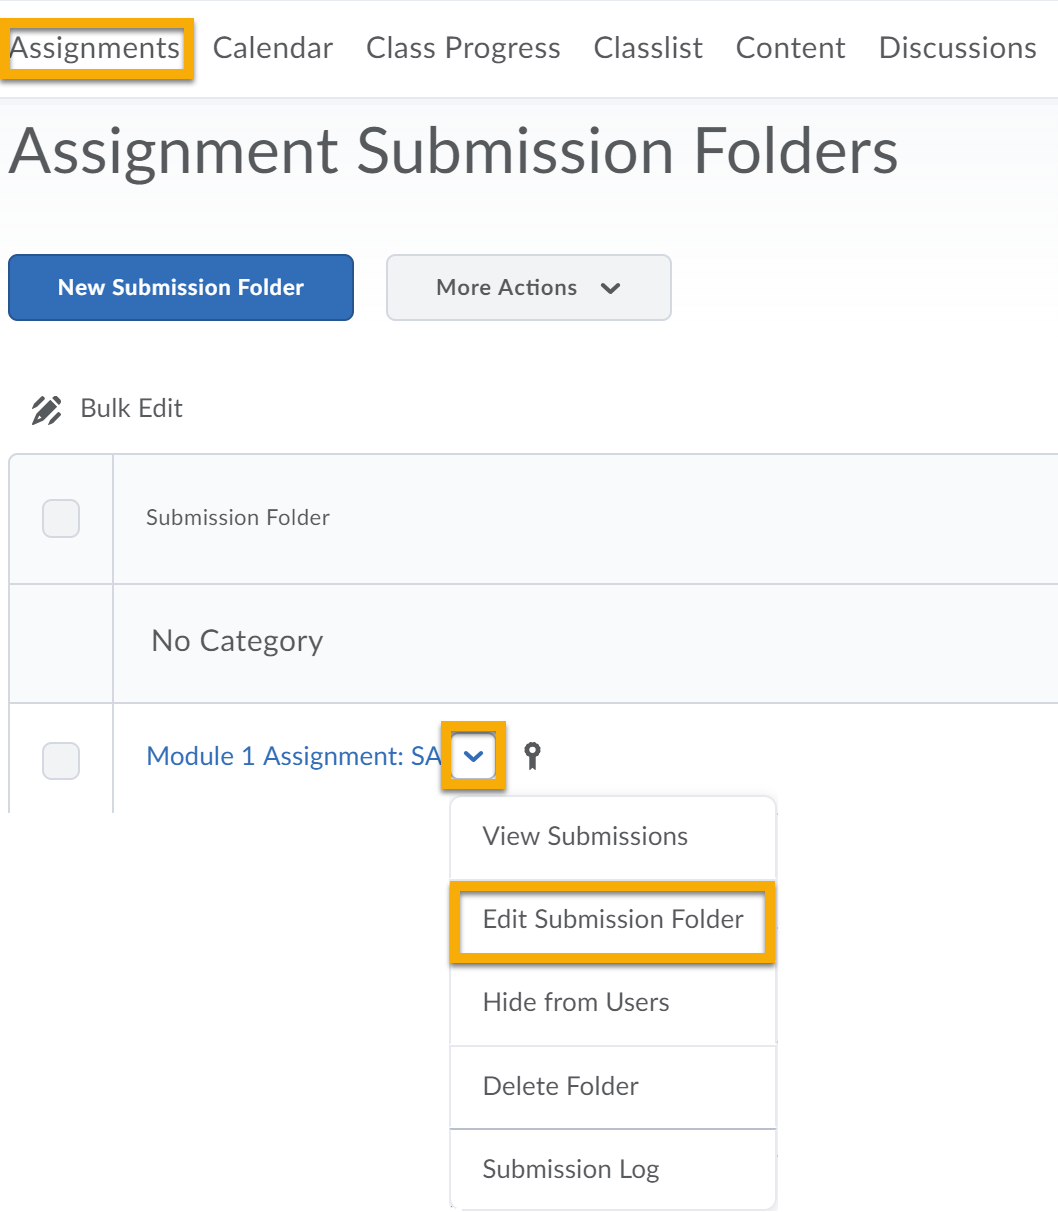 Assignments highlighted on the navbar. Assignment folder context menu expanded to highlight Edit Submission Folder.